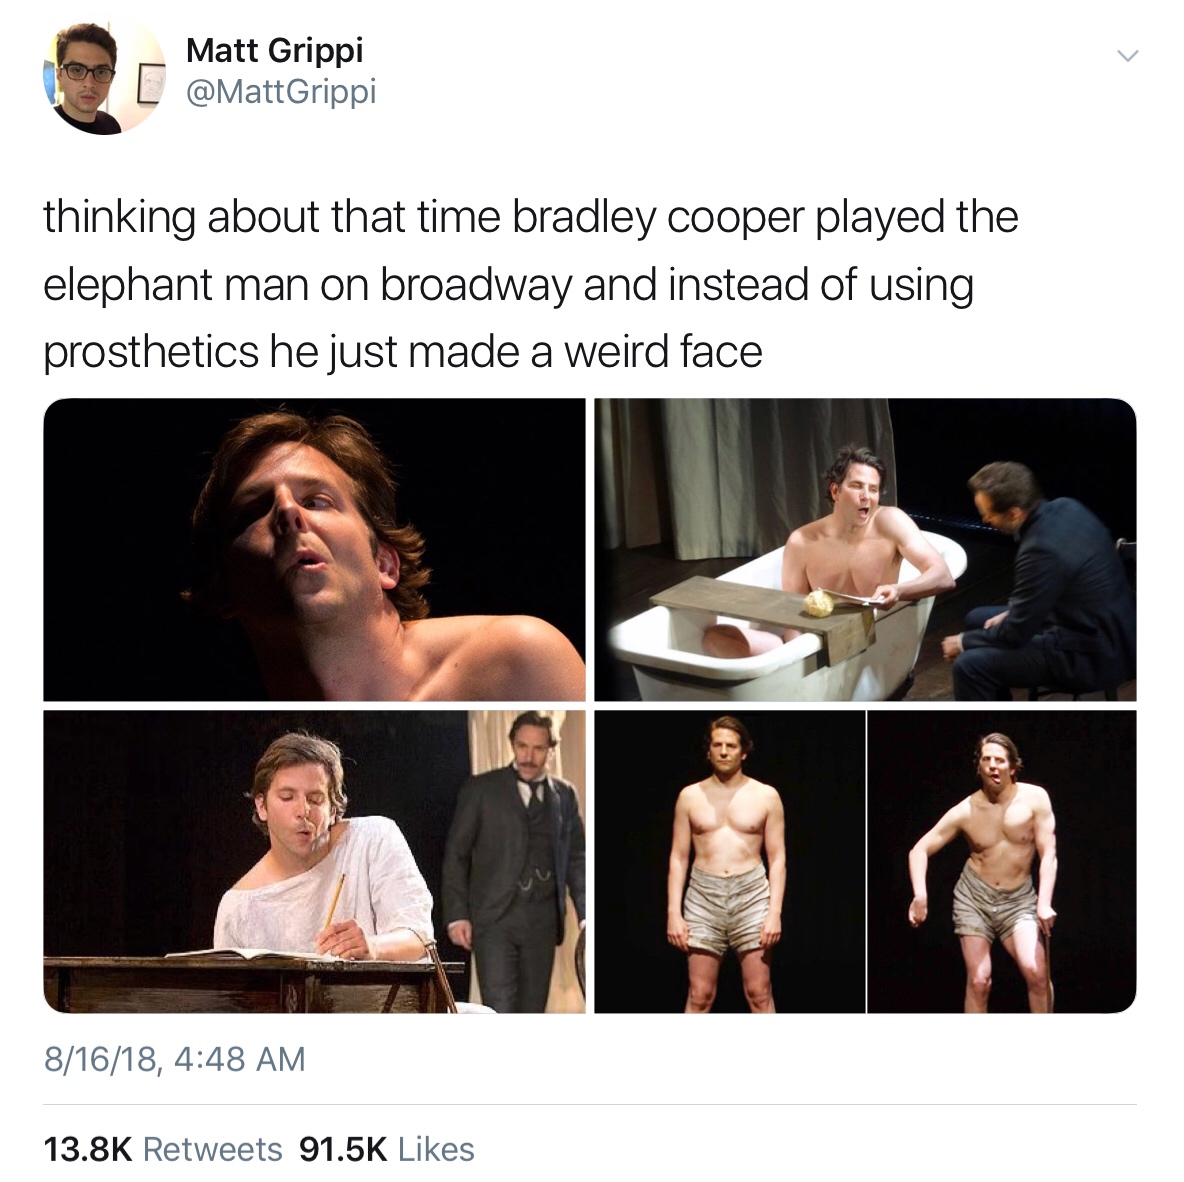 water at 3 am meme - Matt Grippi L thinking about that time bradley Cooper played the elephant man on broadway and instead of using prosthetics he just made a weird face 81618,